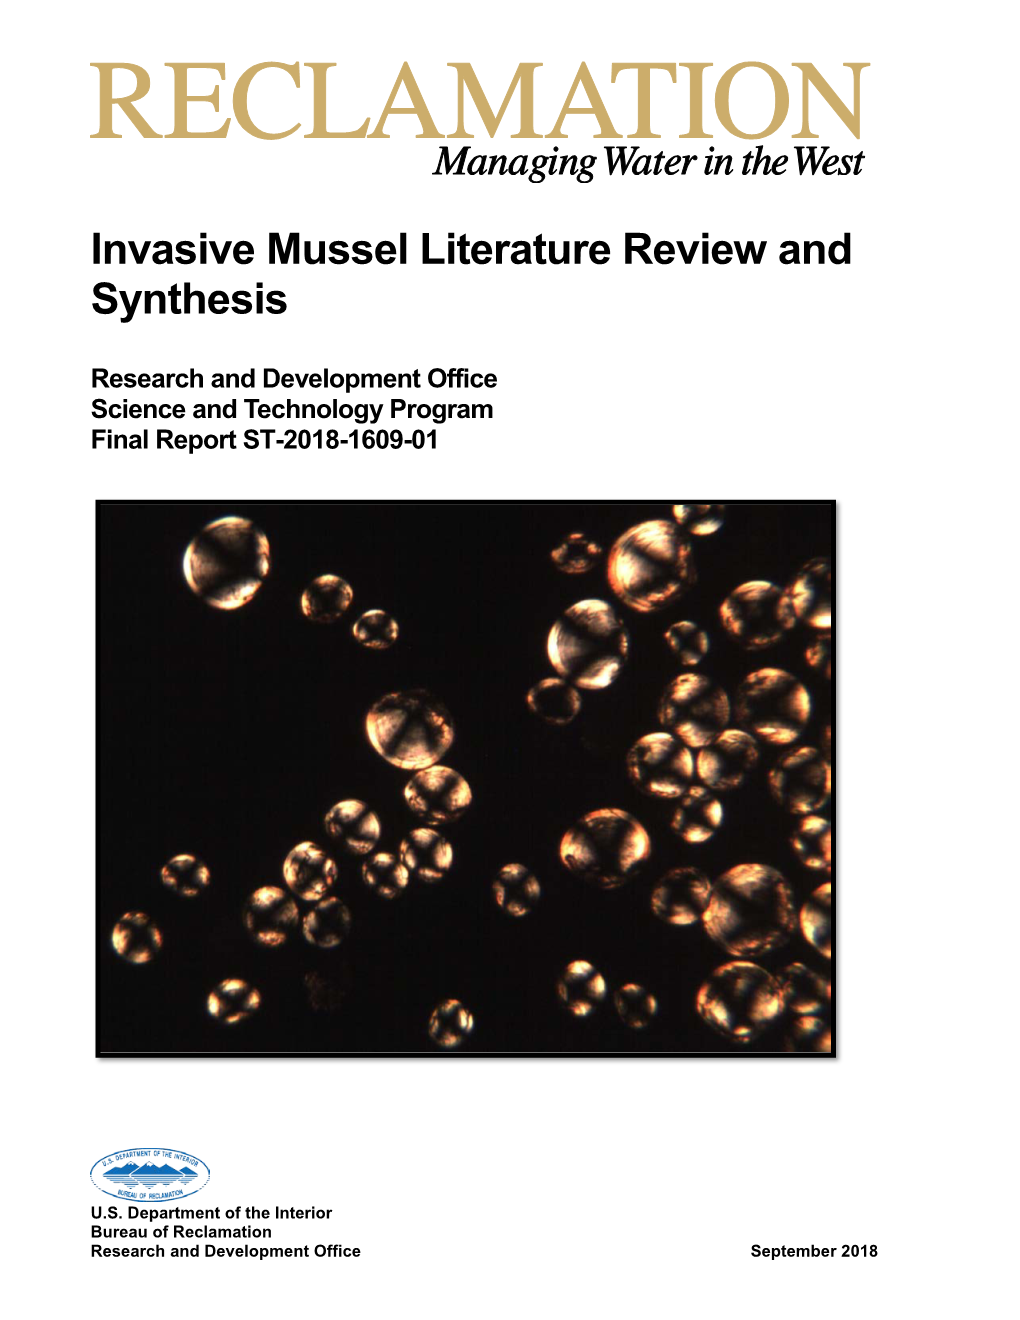 Invasive Mussel Literature Review and Synthesis